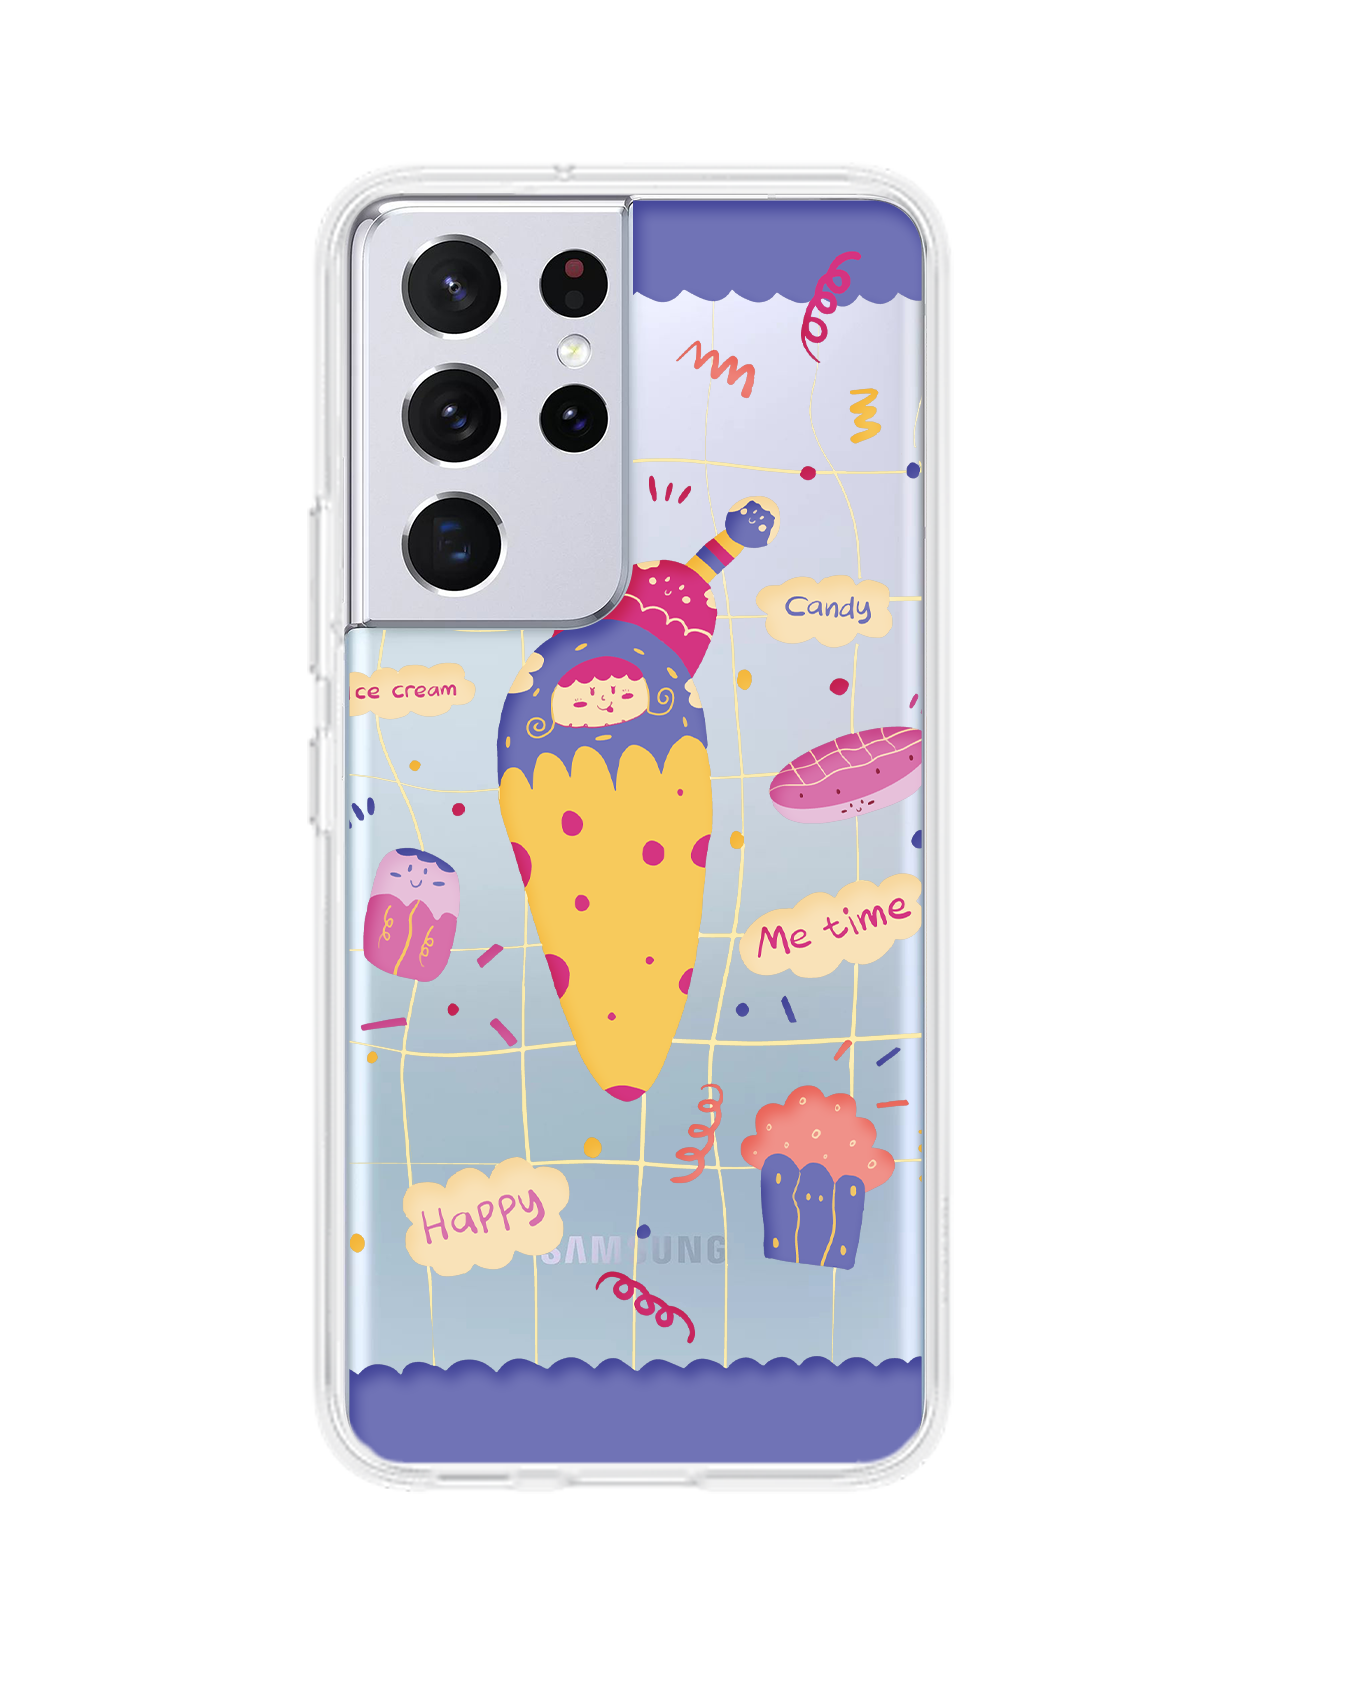 Android Rearguard Hybrid Case - Candy Doodle